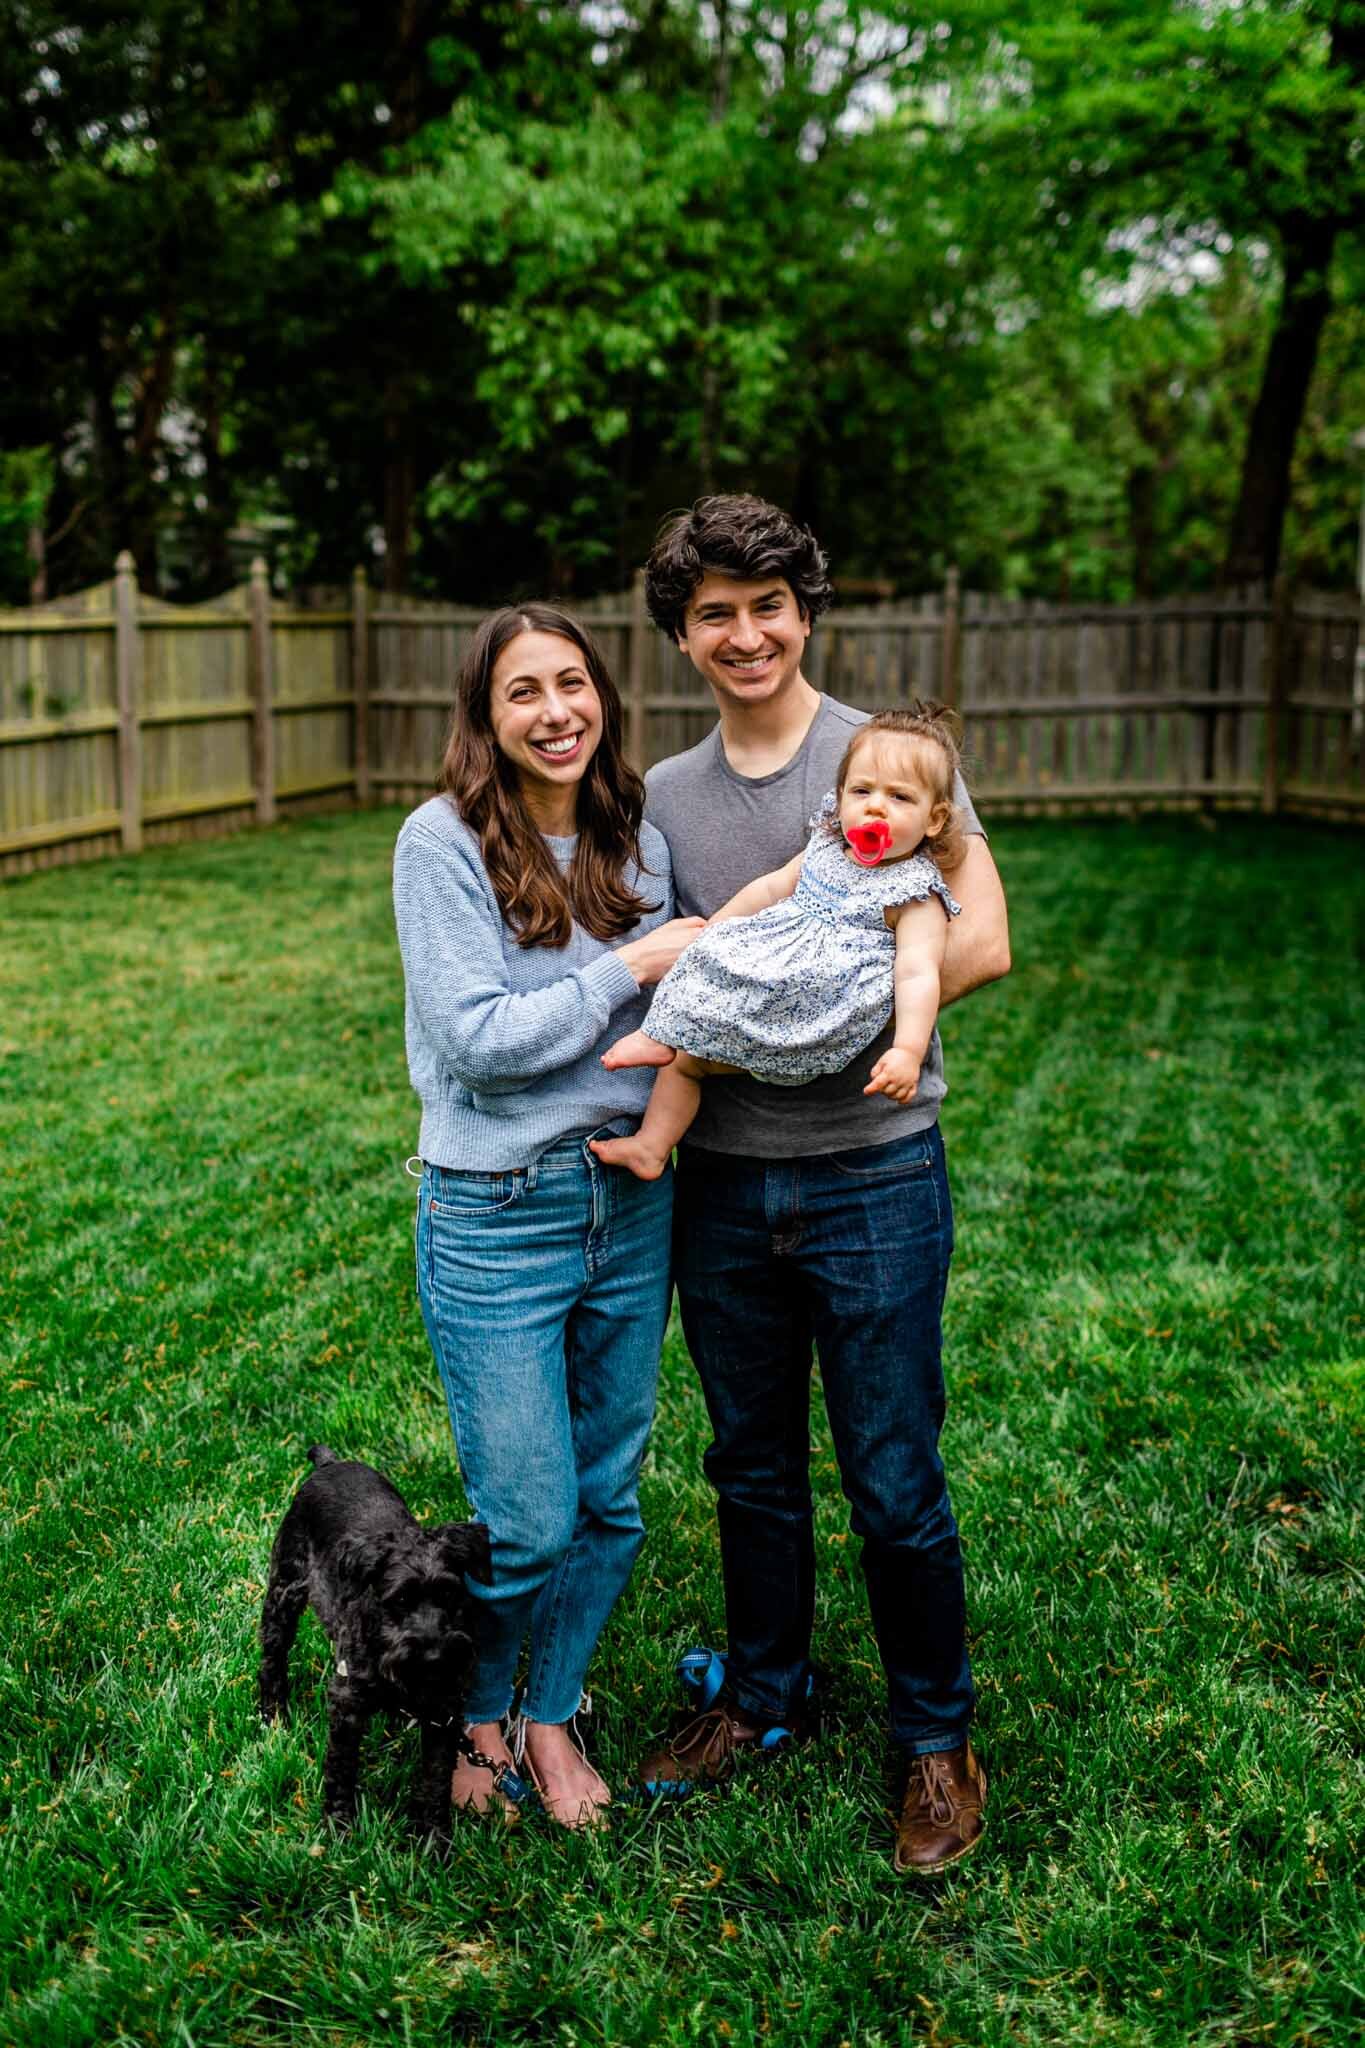 Durham Family Photographer | By G. Lin Photography | Spring family portrait outside on grass